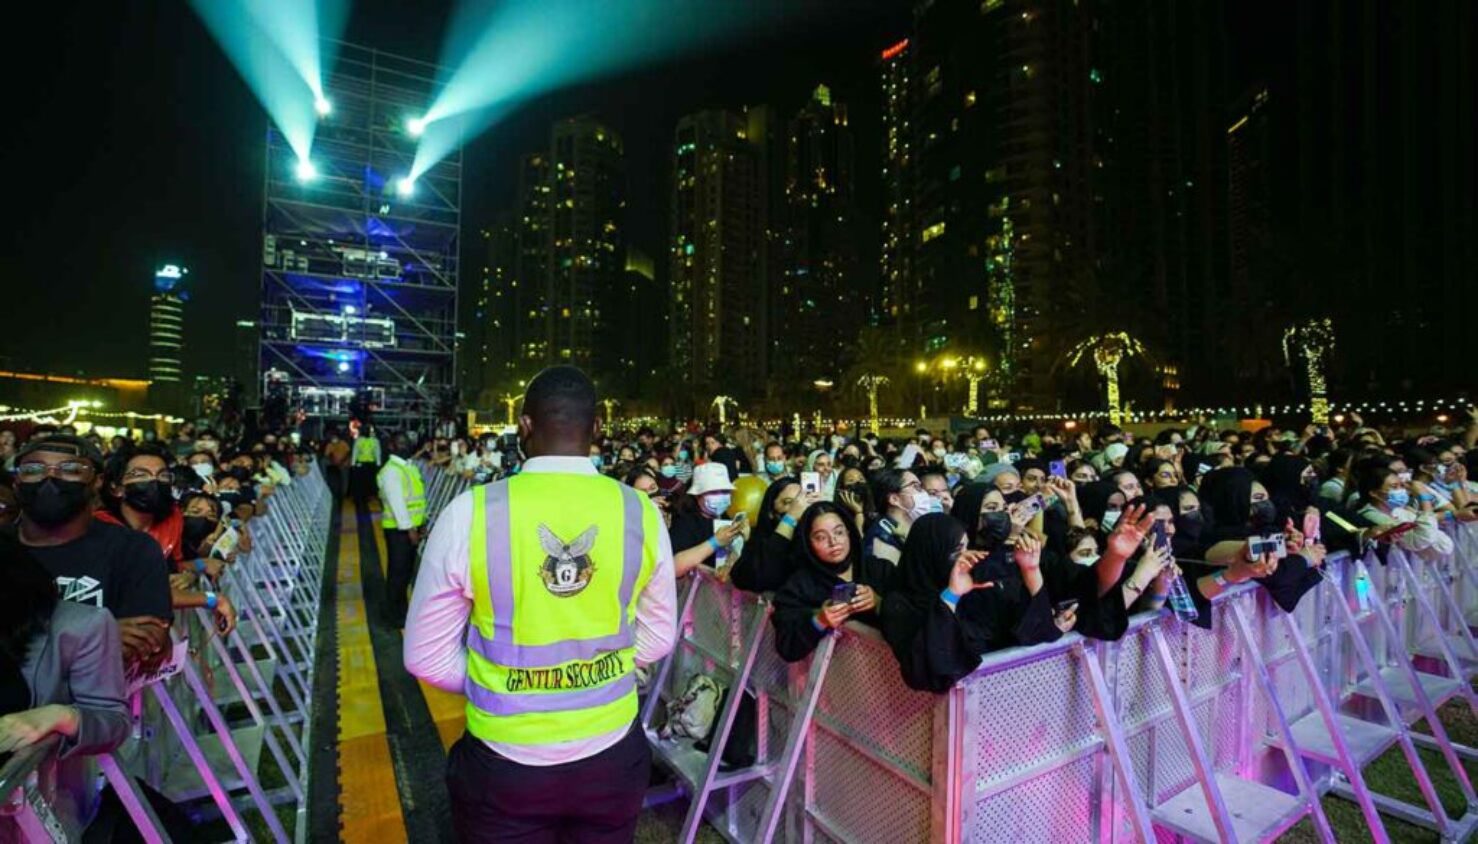 event security controlling the crowd